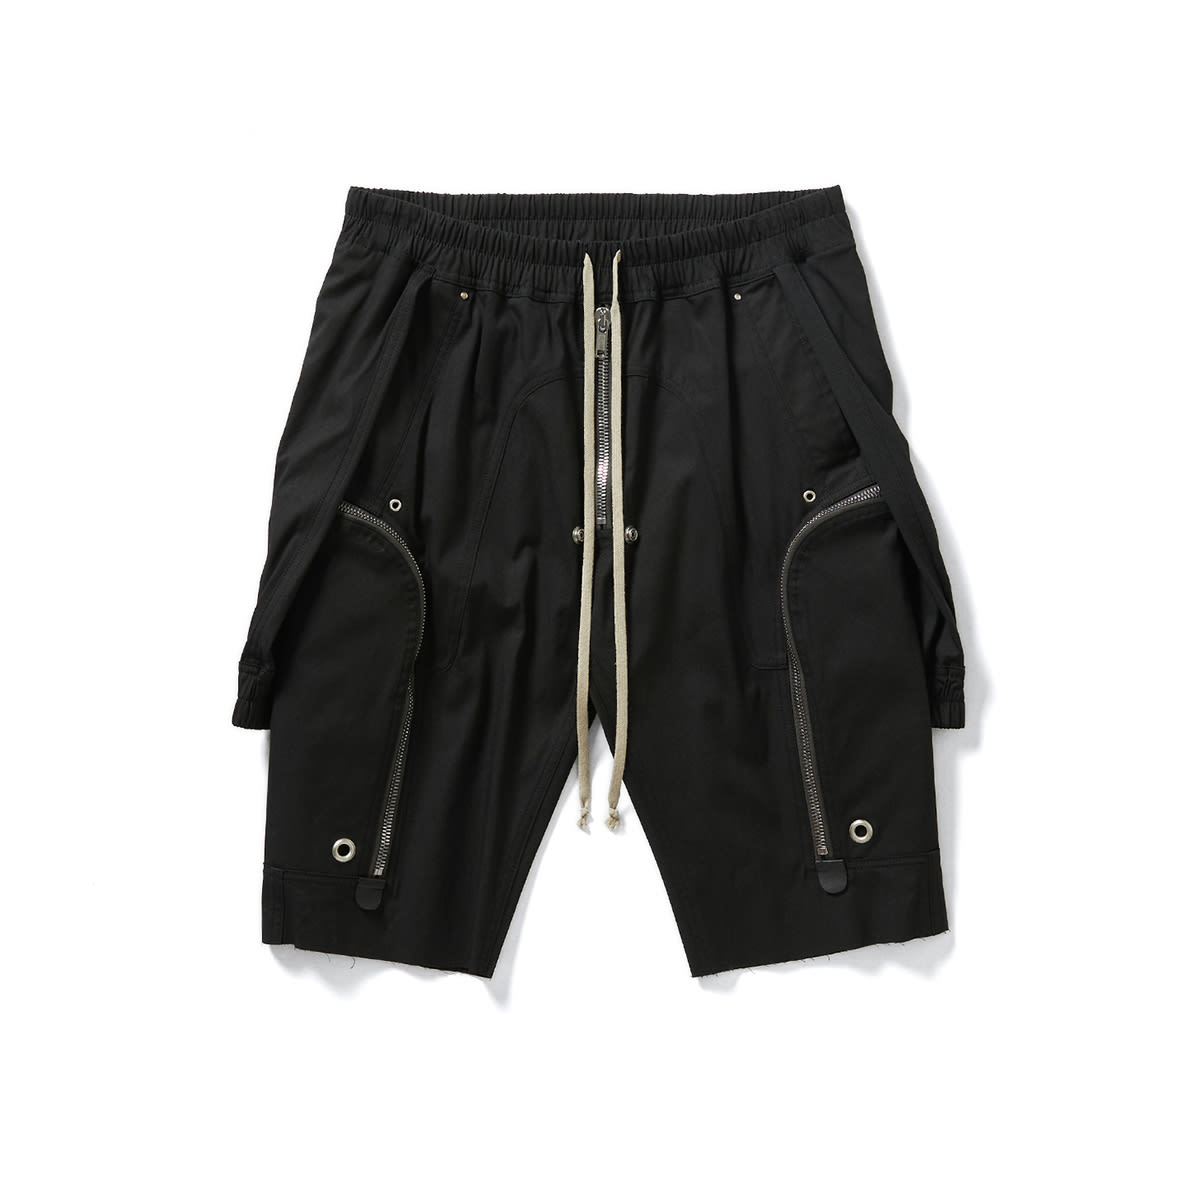 Rick Owens SWAMPGOD by END. Bauhaus Cargo Pant (Black) | END. Launches